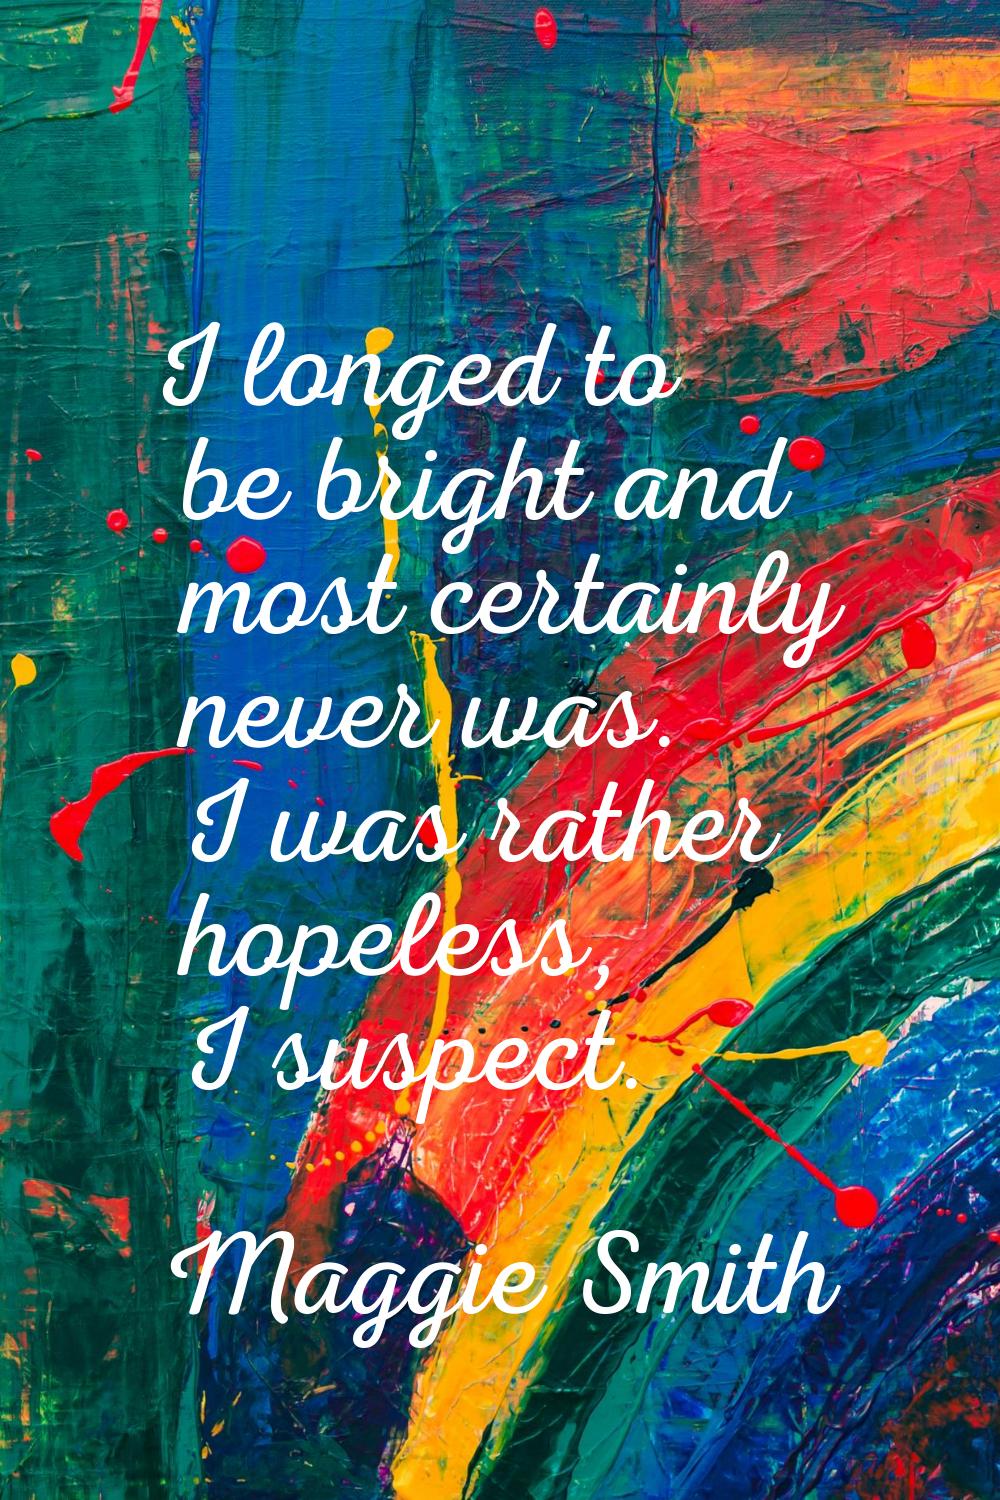 I longed to be bright and most certainly never was. I was rather hopeless, I suspect.